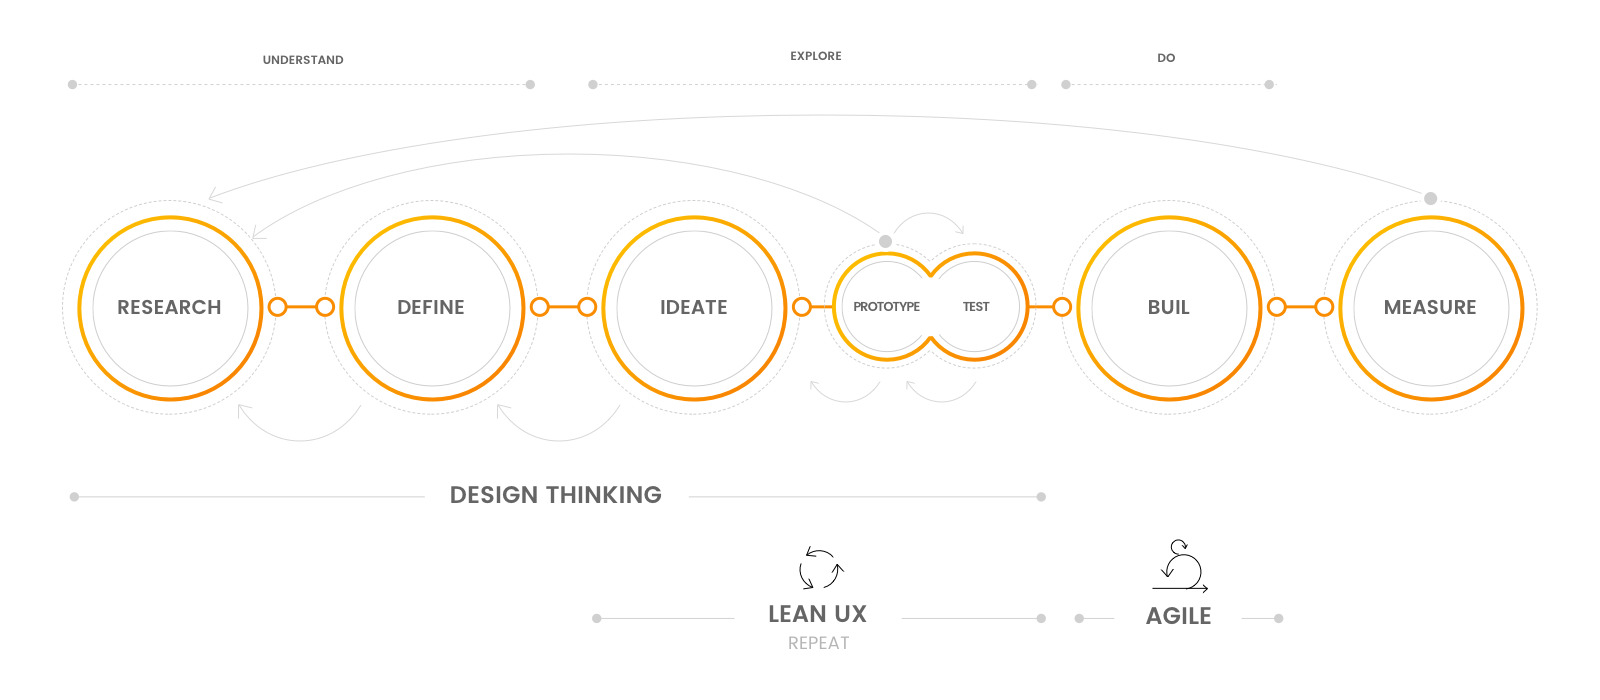 Babel Advanced UX. Summary diagram of the UX process based on researching, defining, devising, building and measuring